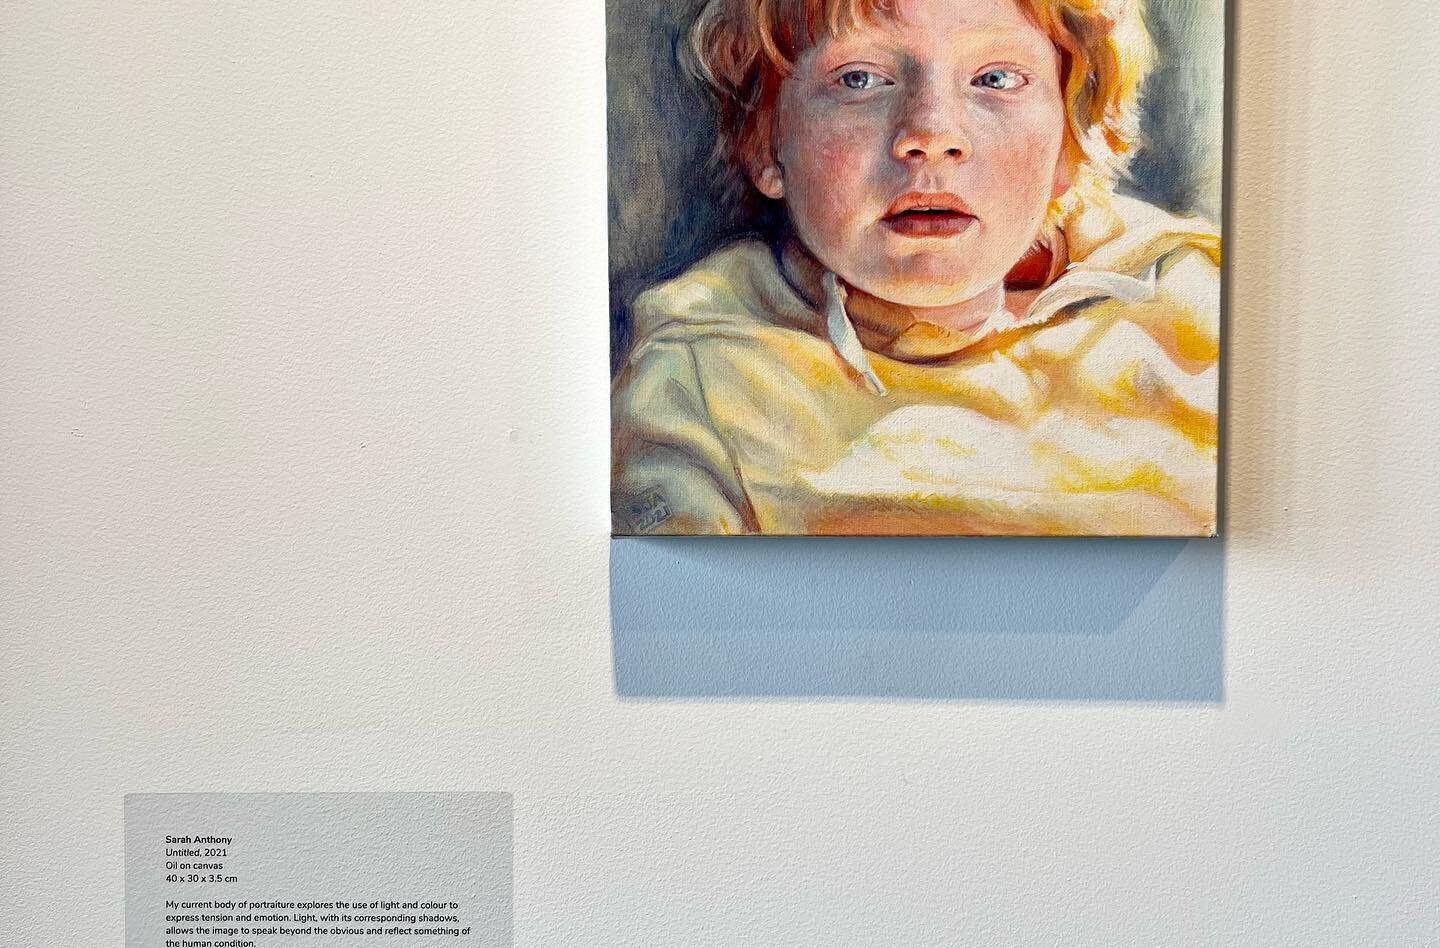 Voting is open for Peoples Choice at the Merri-bek summer show at the Counihan Gallery, Brunswick. Congrats to all the artists, it&rsquo;s lovely to see the breadth and diversity of talent on our local area. 

Vote here: https://morelandcitycouncil.s